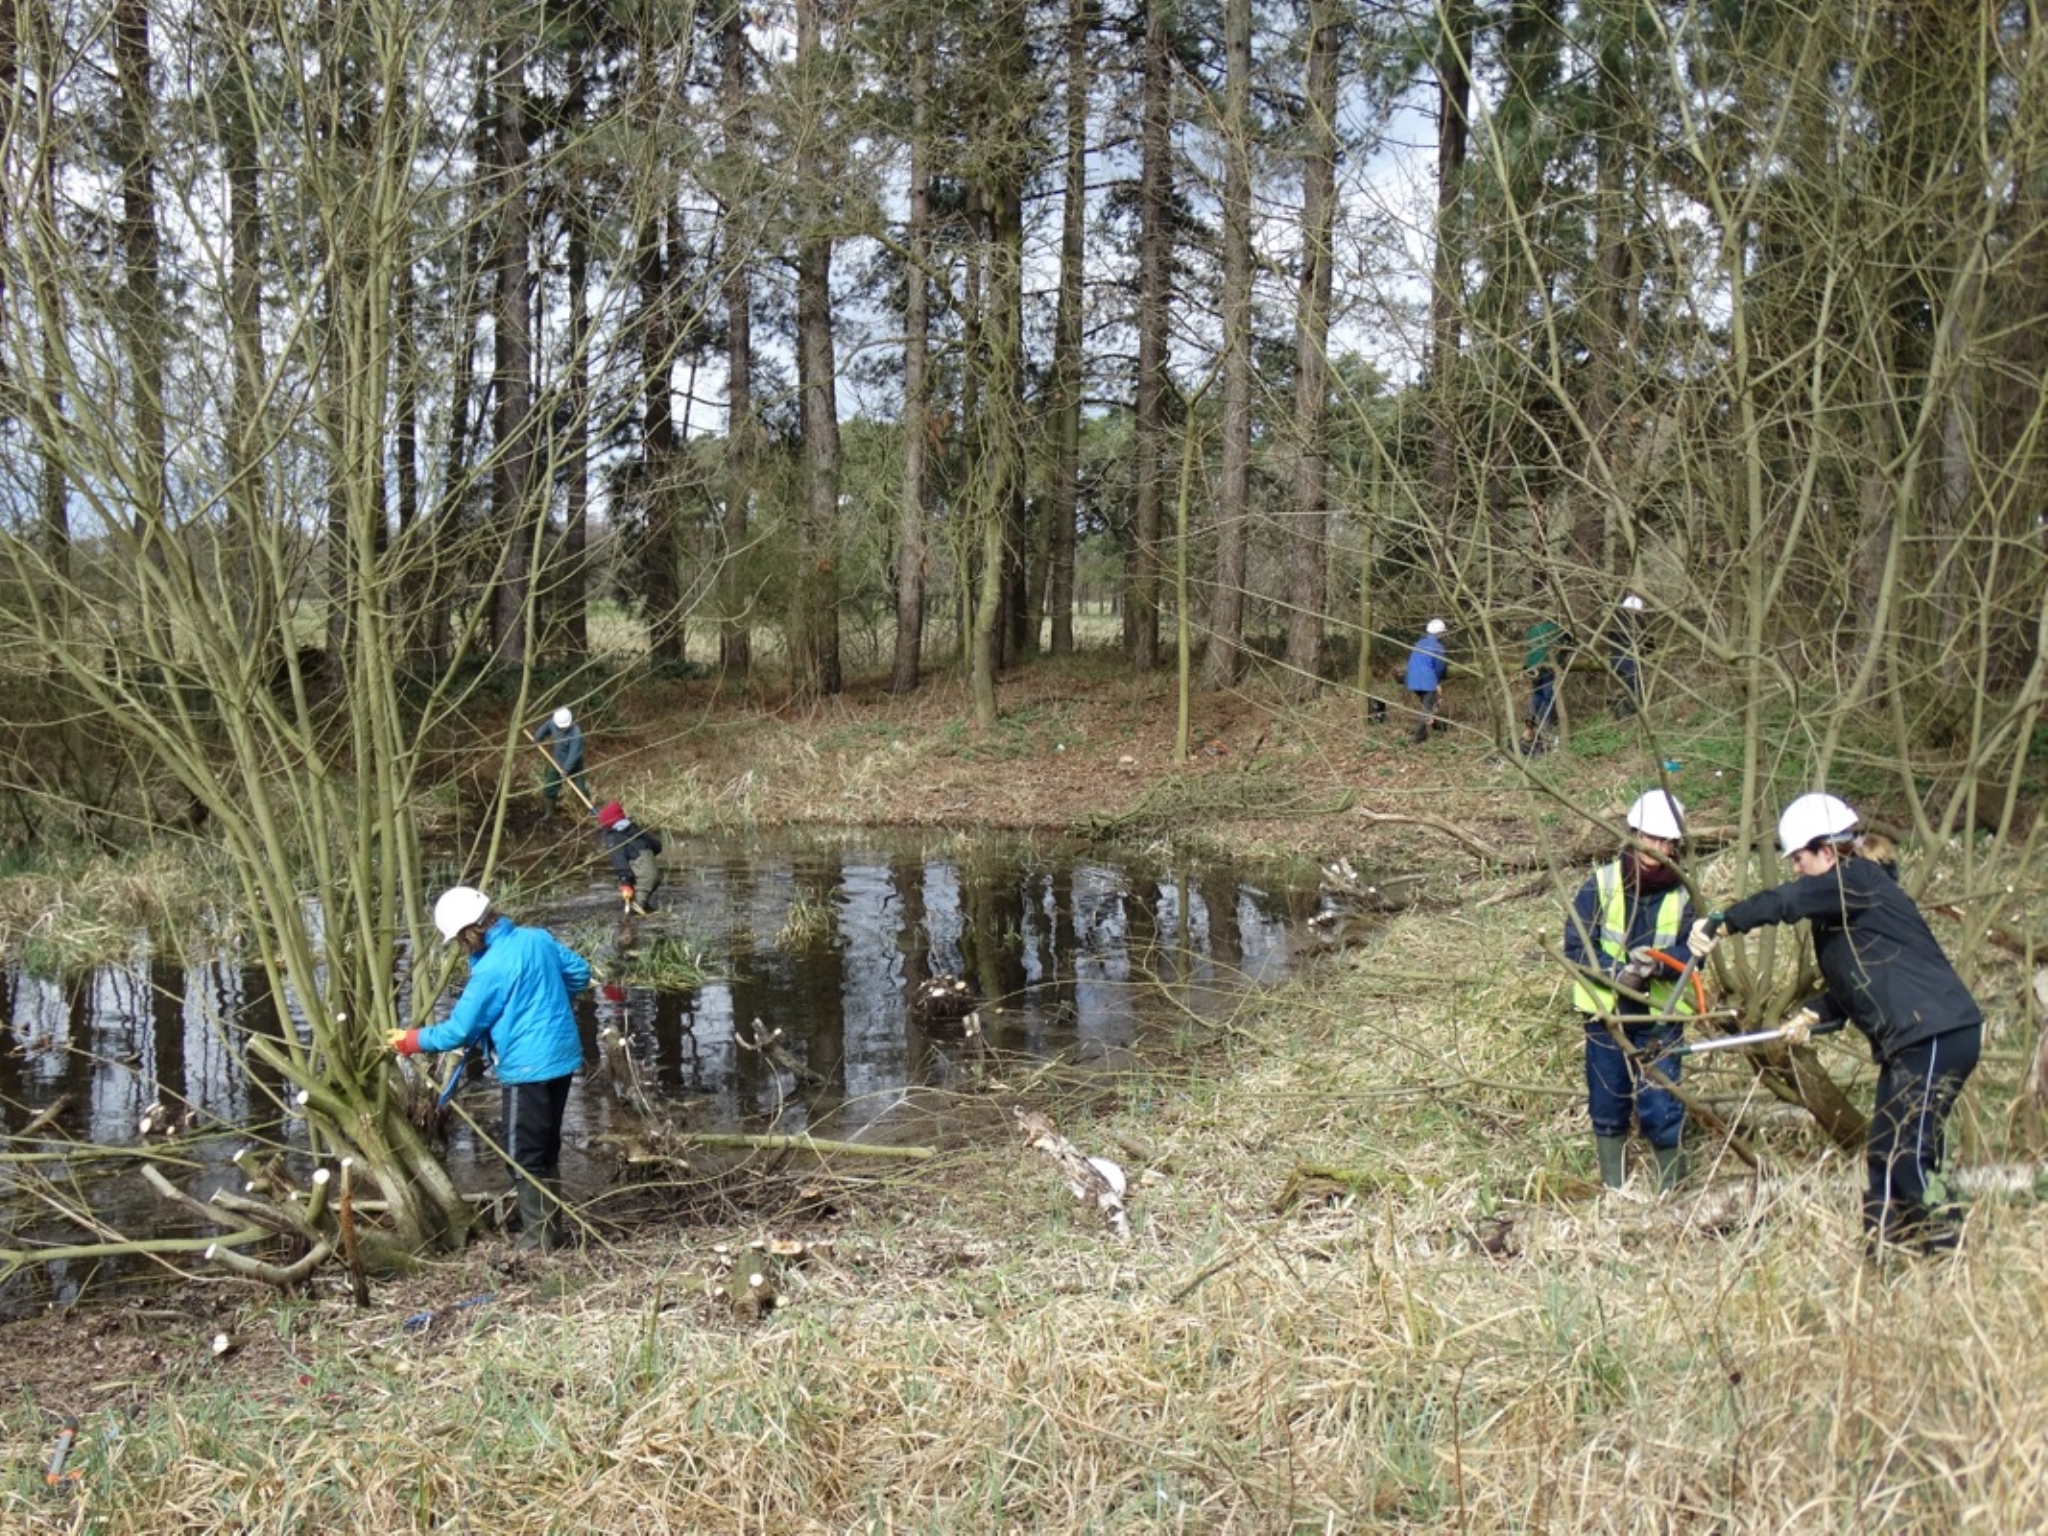 A photo from the FoTF Conservation Event - March 2019 - Clearance work around, and in, the ponds at Harling Woods, Harling : Volunteers working on the edge of one of the ponds